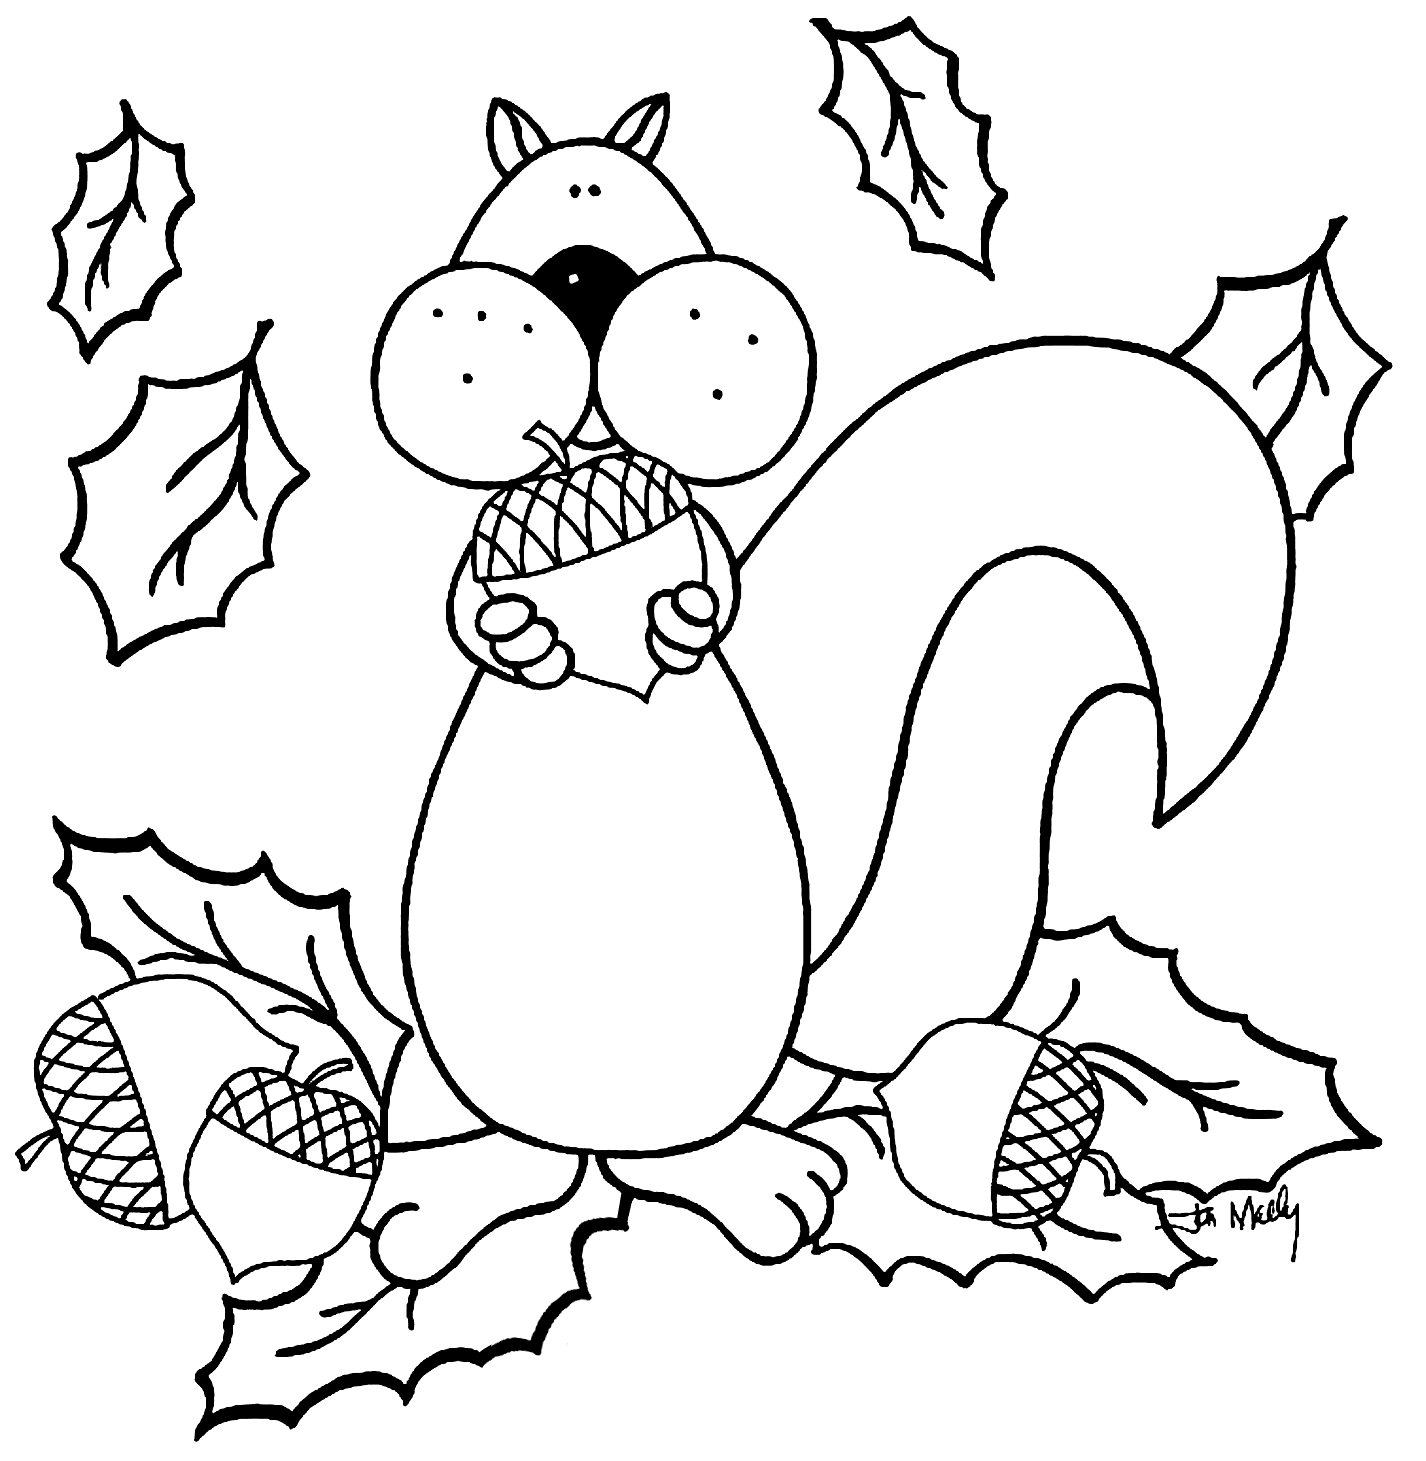 Cute Squirrel Collecting Acorns Coloring Page